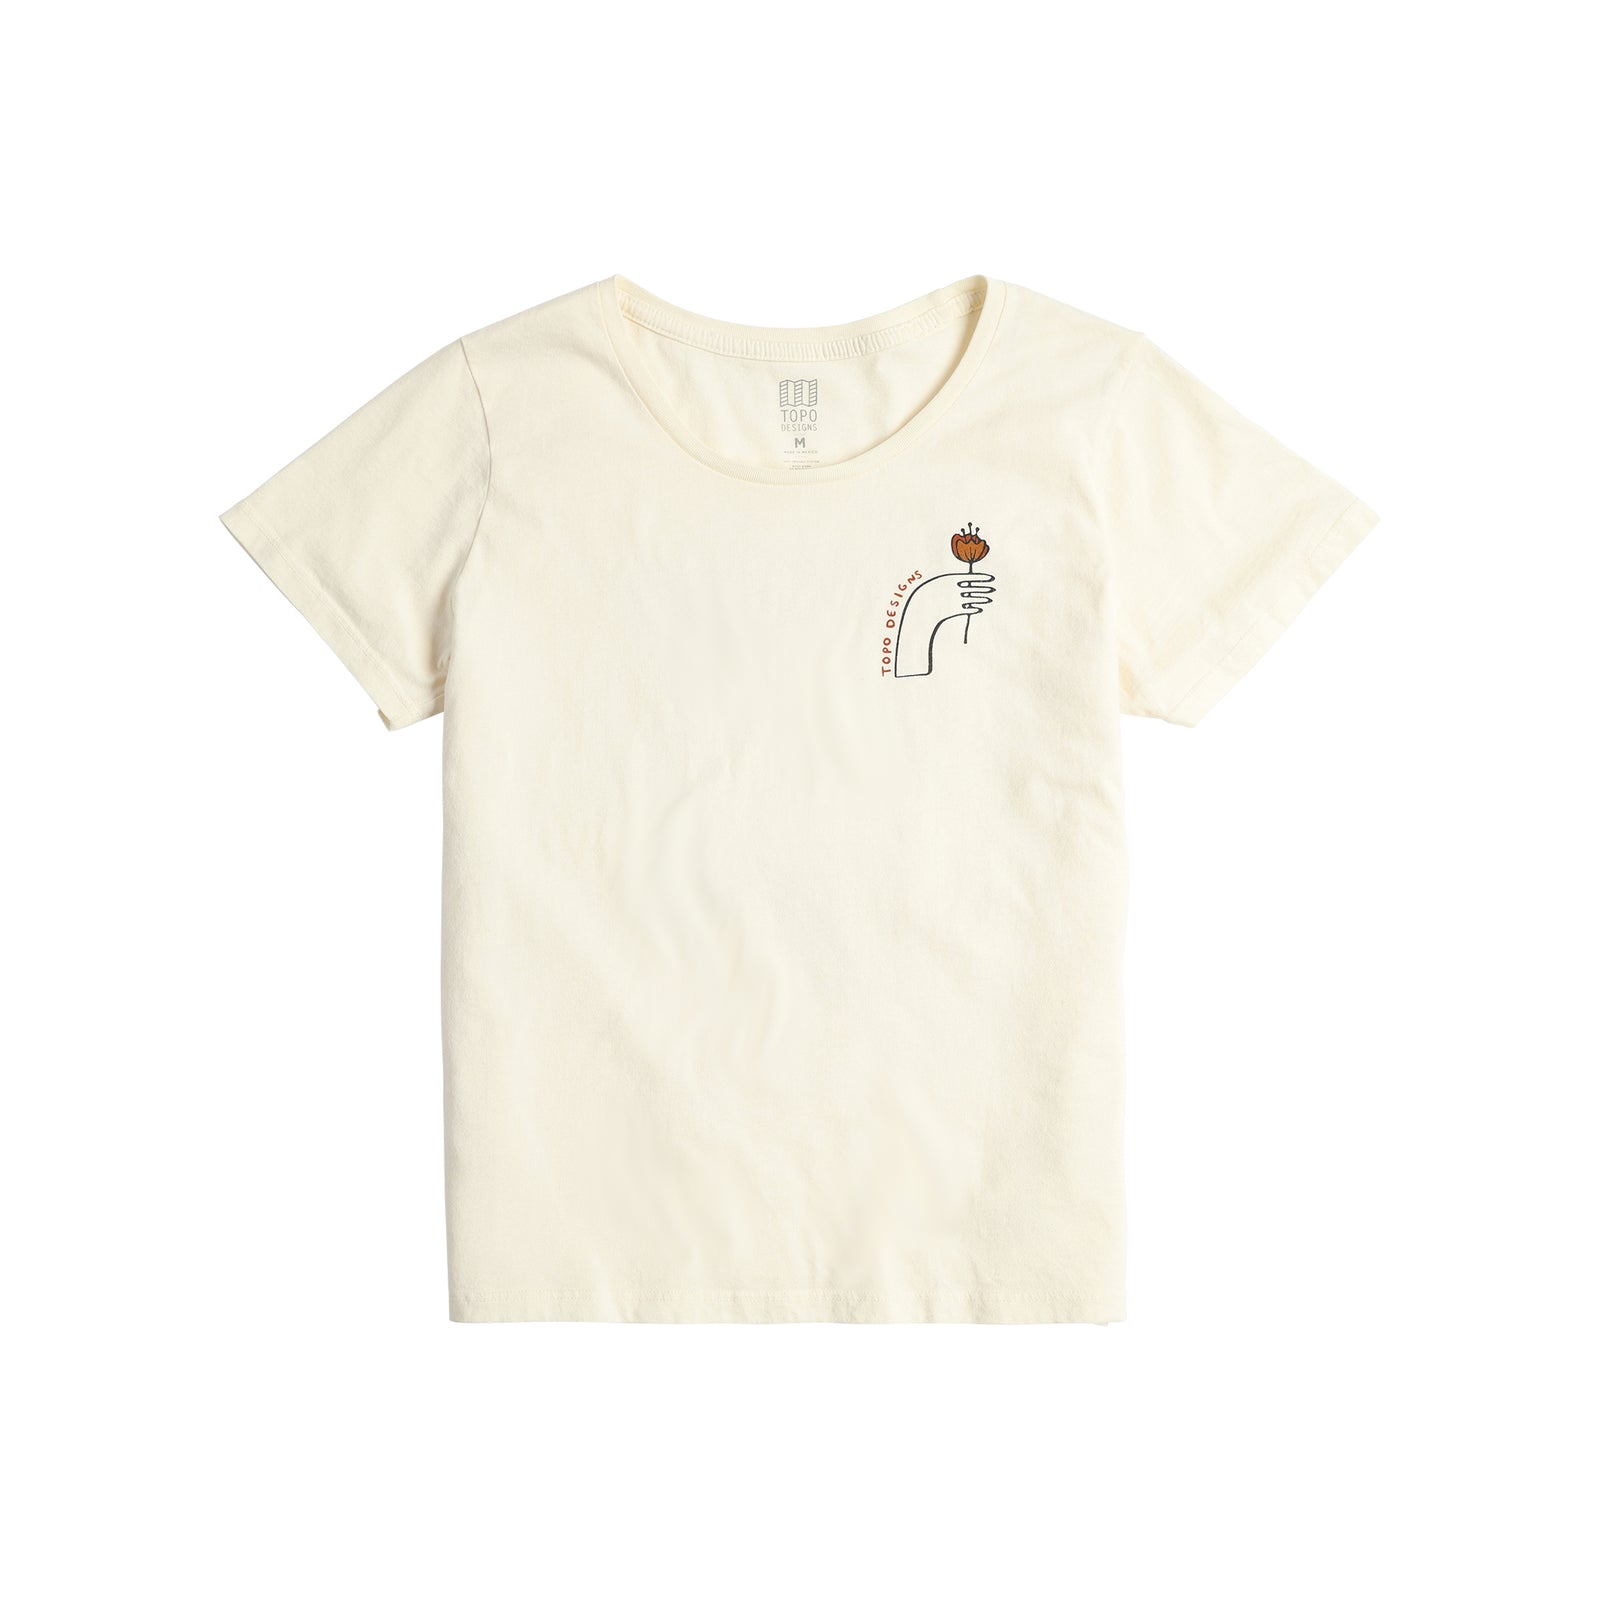 Front View of Topo Designs Meadow Tee - Women's in "Natural"